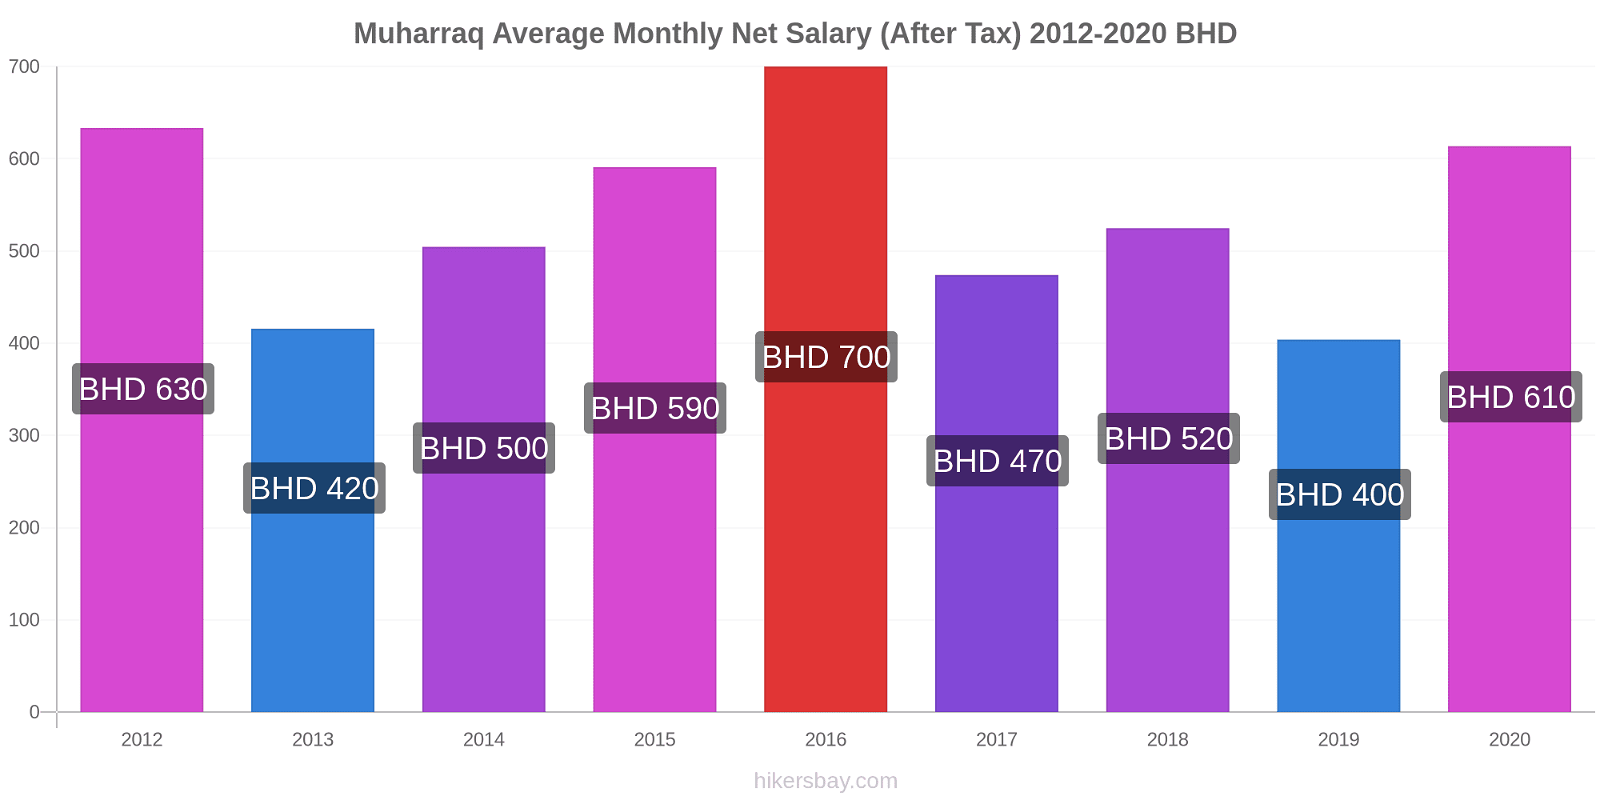 Muharraq price changes Average Monthly Net Salary (After Tax) hikersbay.com